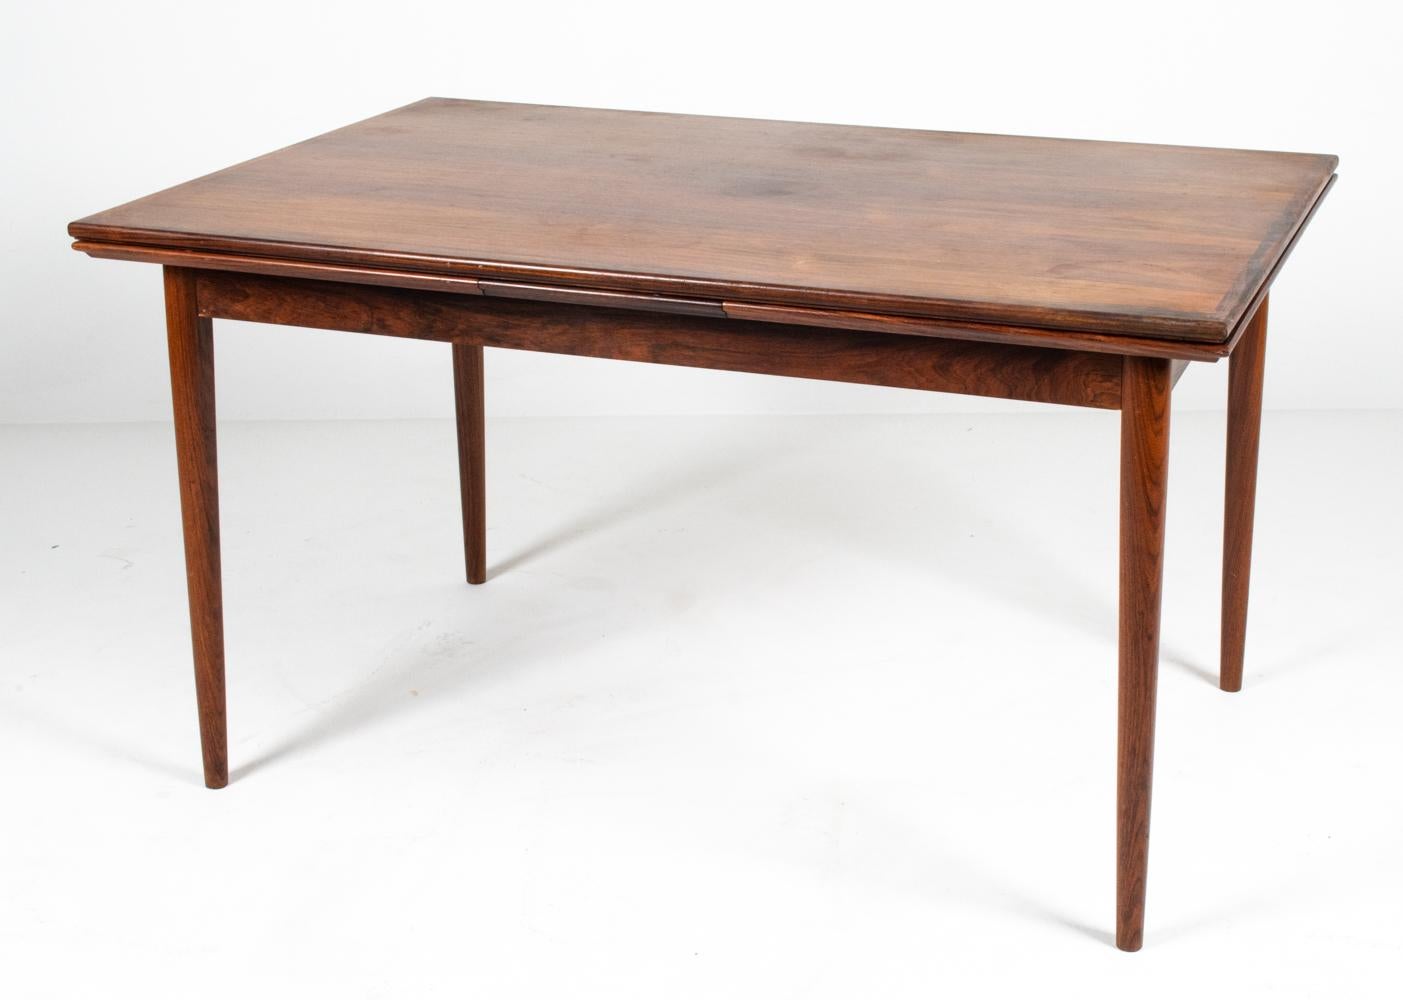 Slim and stylish in its sleek proportions, this Danish mid-century extension dining table has a versatile appearance, well-suited to any modern or traditional interior alike. In typical 20th century Scandinavian Functionalist fashion, minimalist